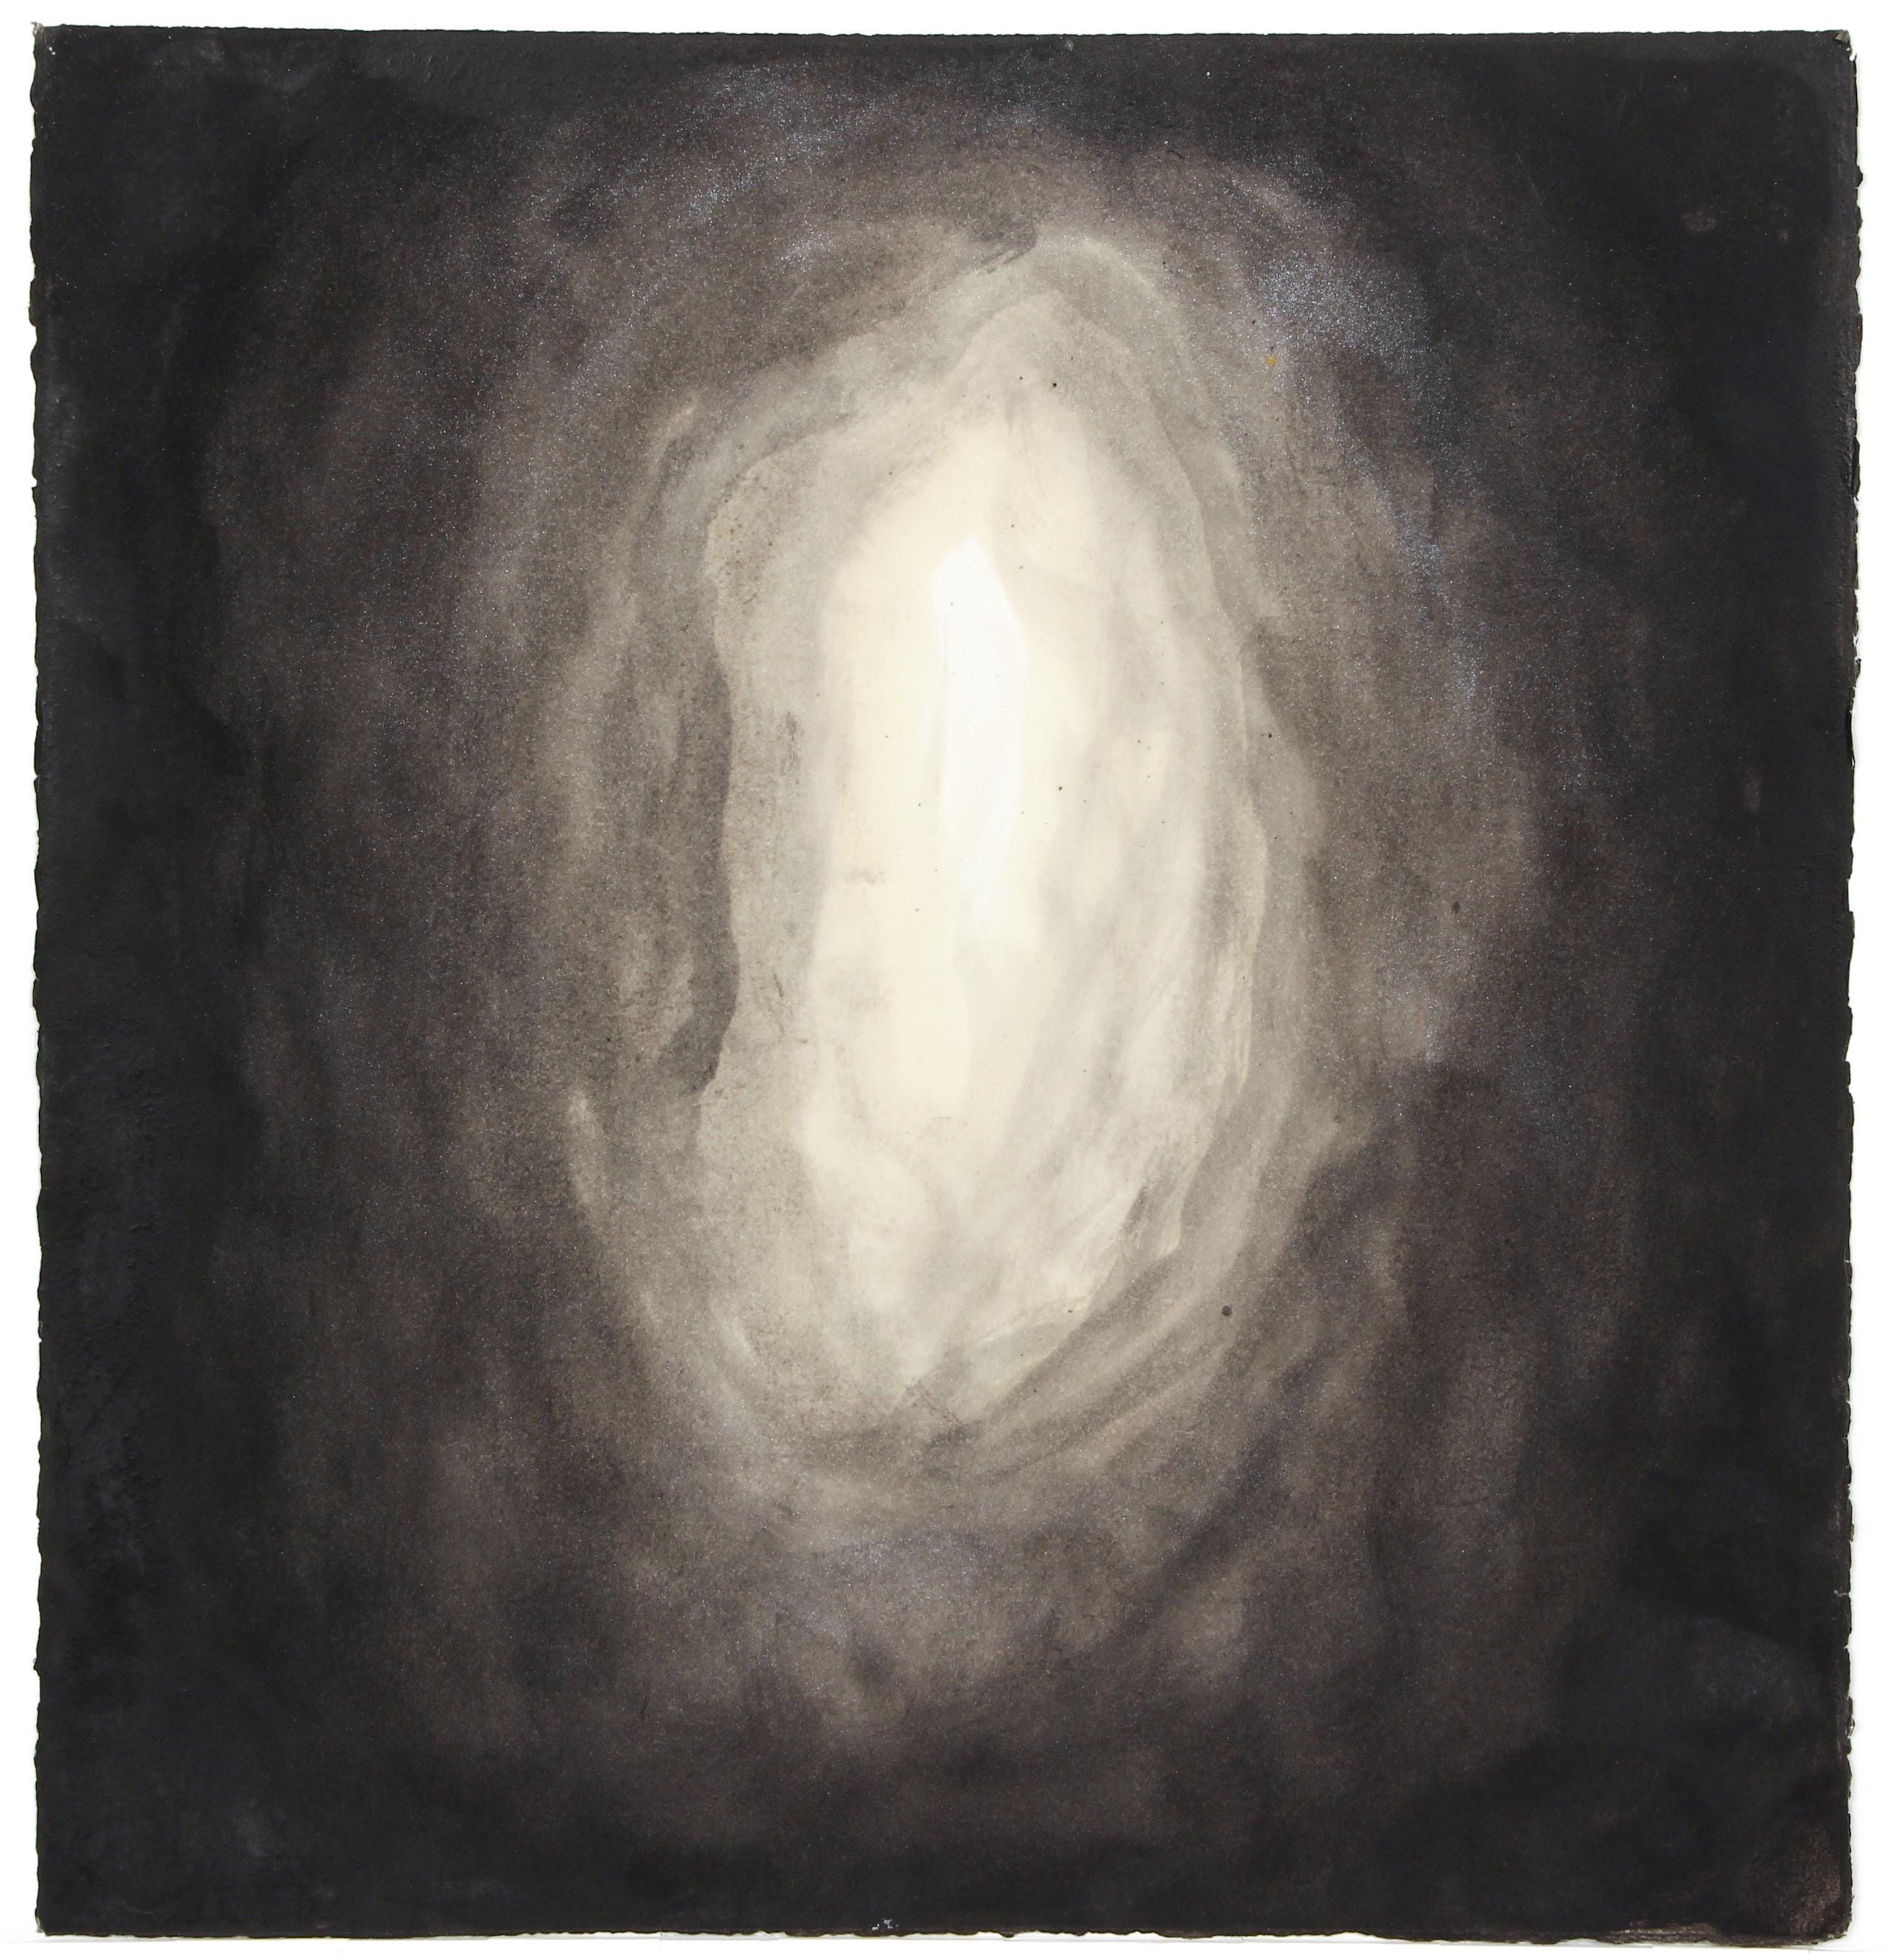 Francis, Shingo (Japanese/American, born 1969),  
W3 , 1999
Encaustic and watercolor painting on Arches paper, 
23.5 x 22.5 inches, 
Hand signed and dated verso 
Provenance: Garner Tullis Workshop

Shingo Francis is a painter, drawer and